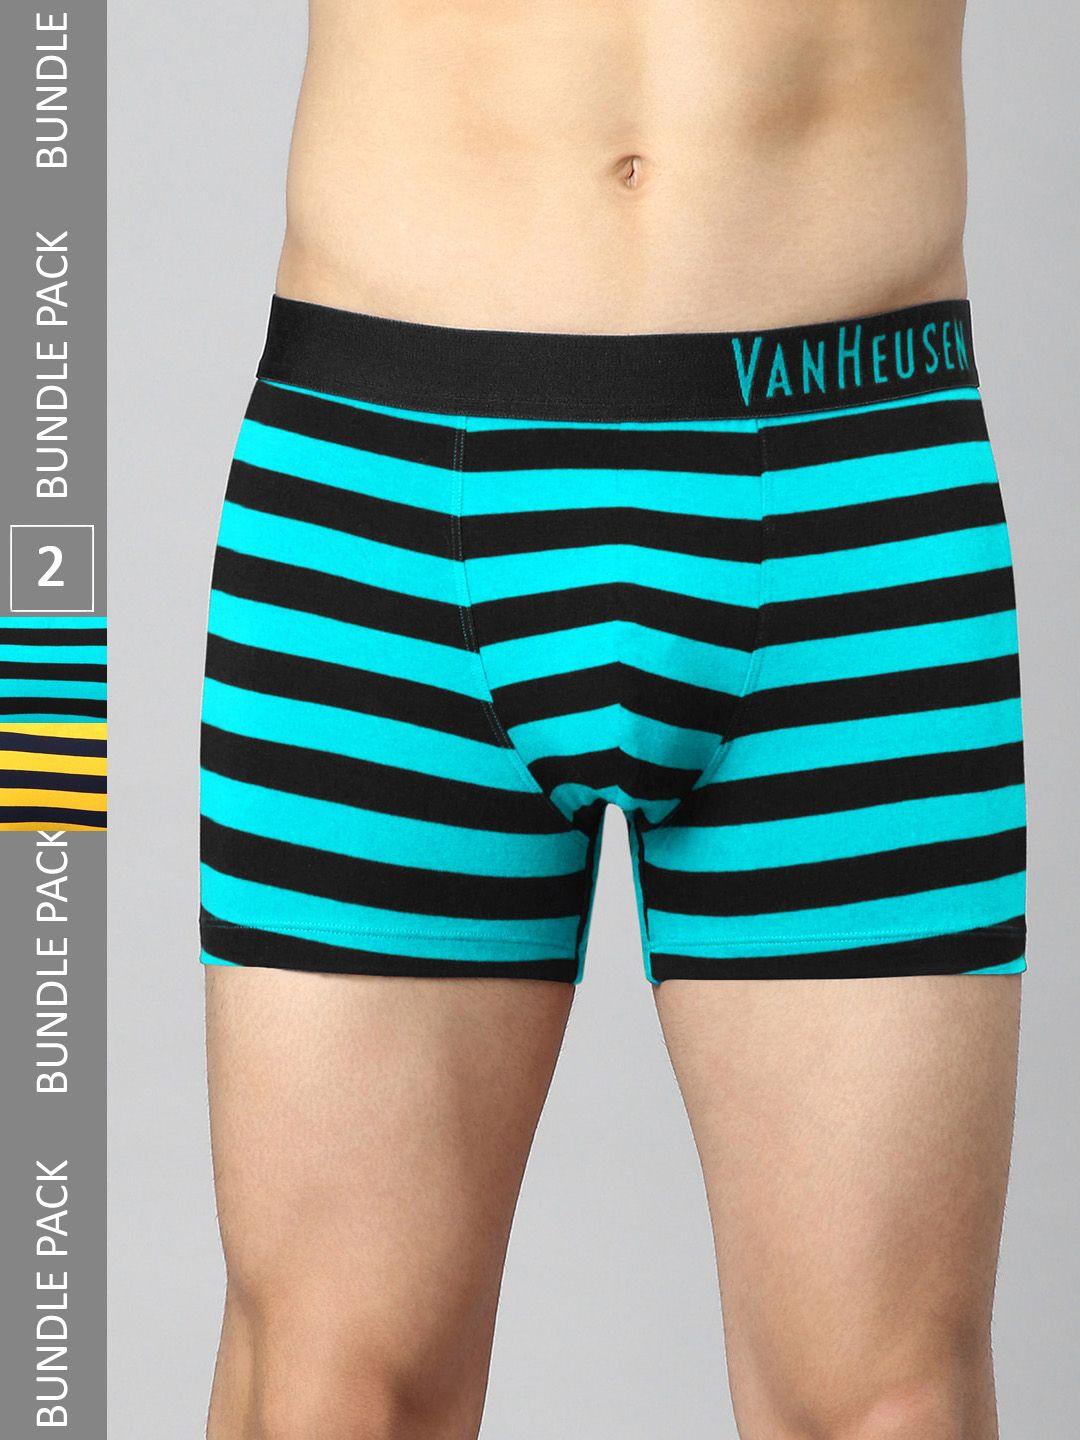 Van Heusen Pack Of 2 Striped Low Rise Trunks IHQTR2C310055